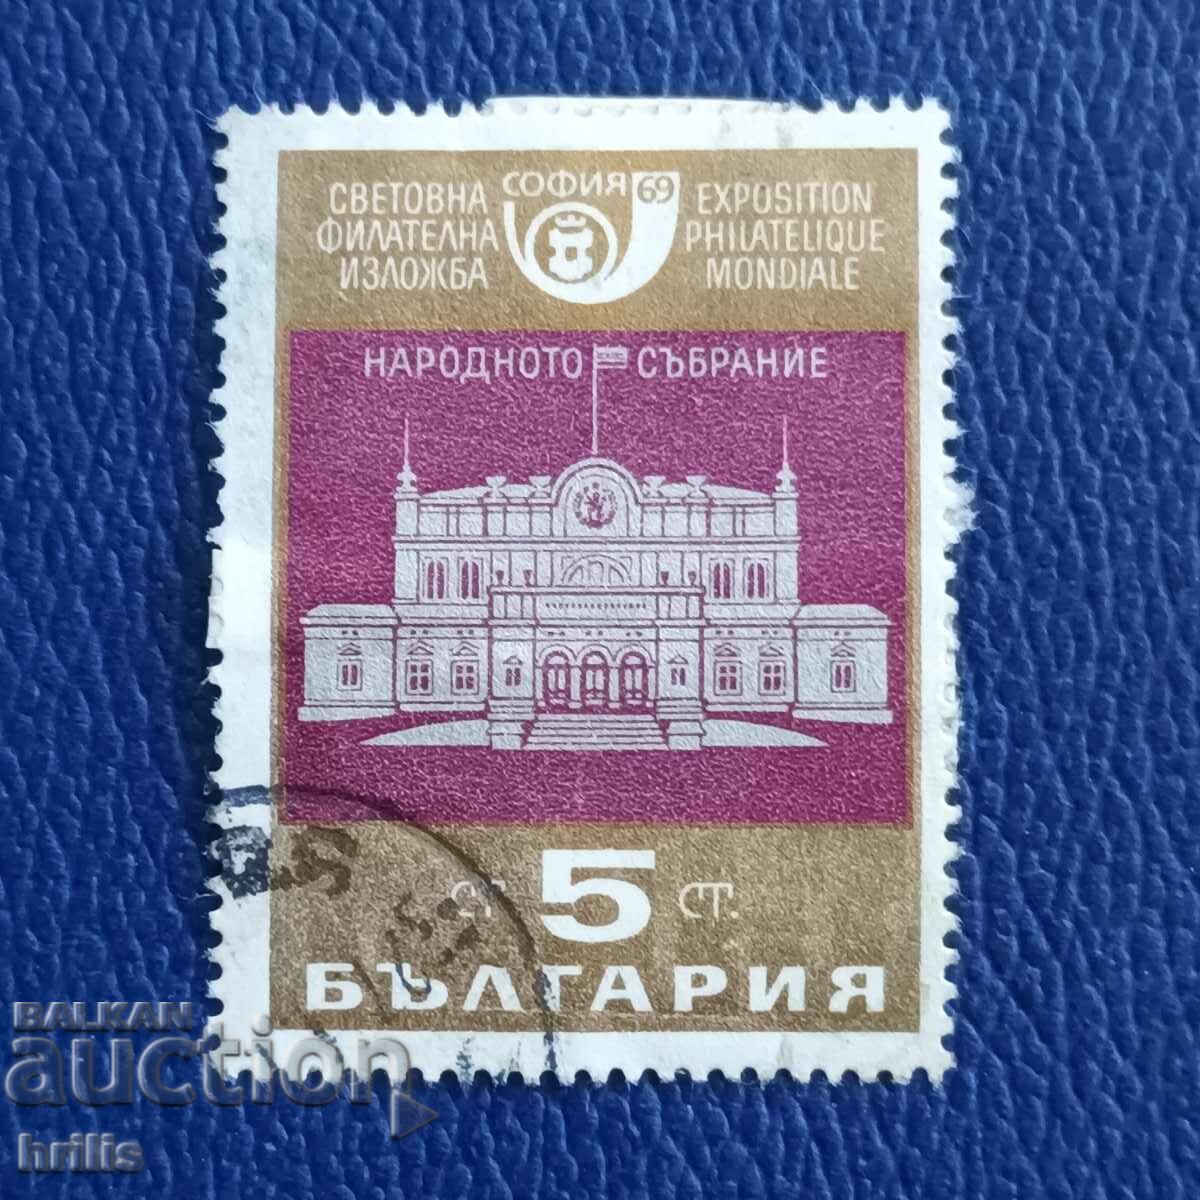 BULGARIA 1969 - THE NATIONAL ASSEMBLY